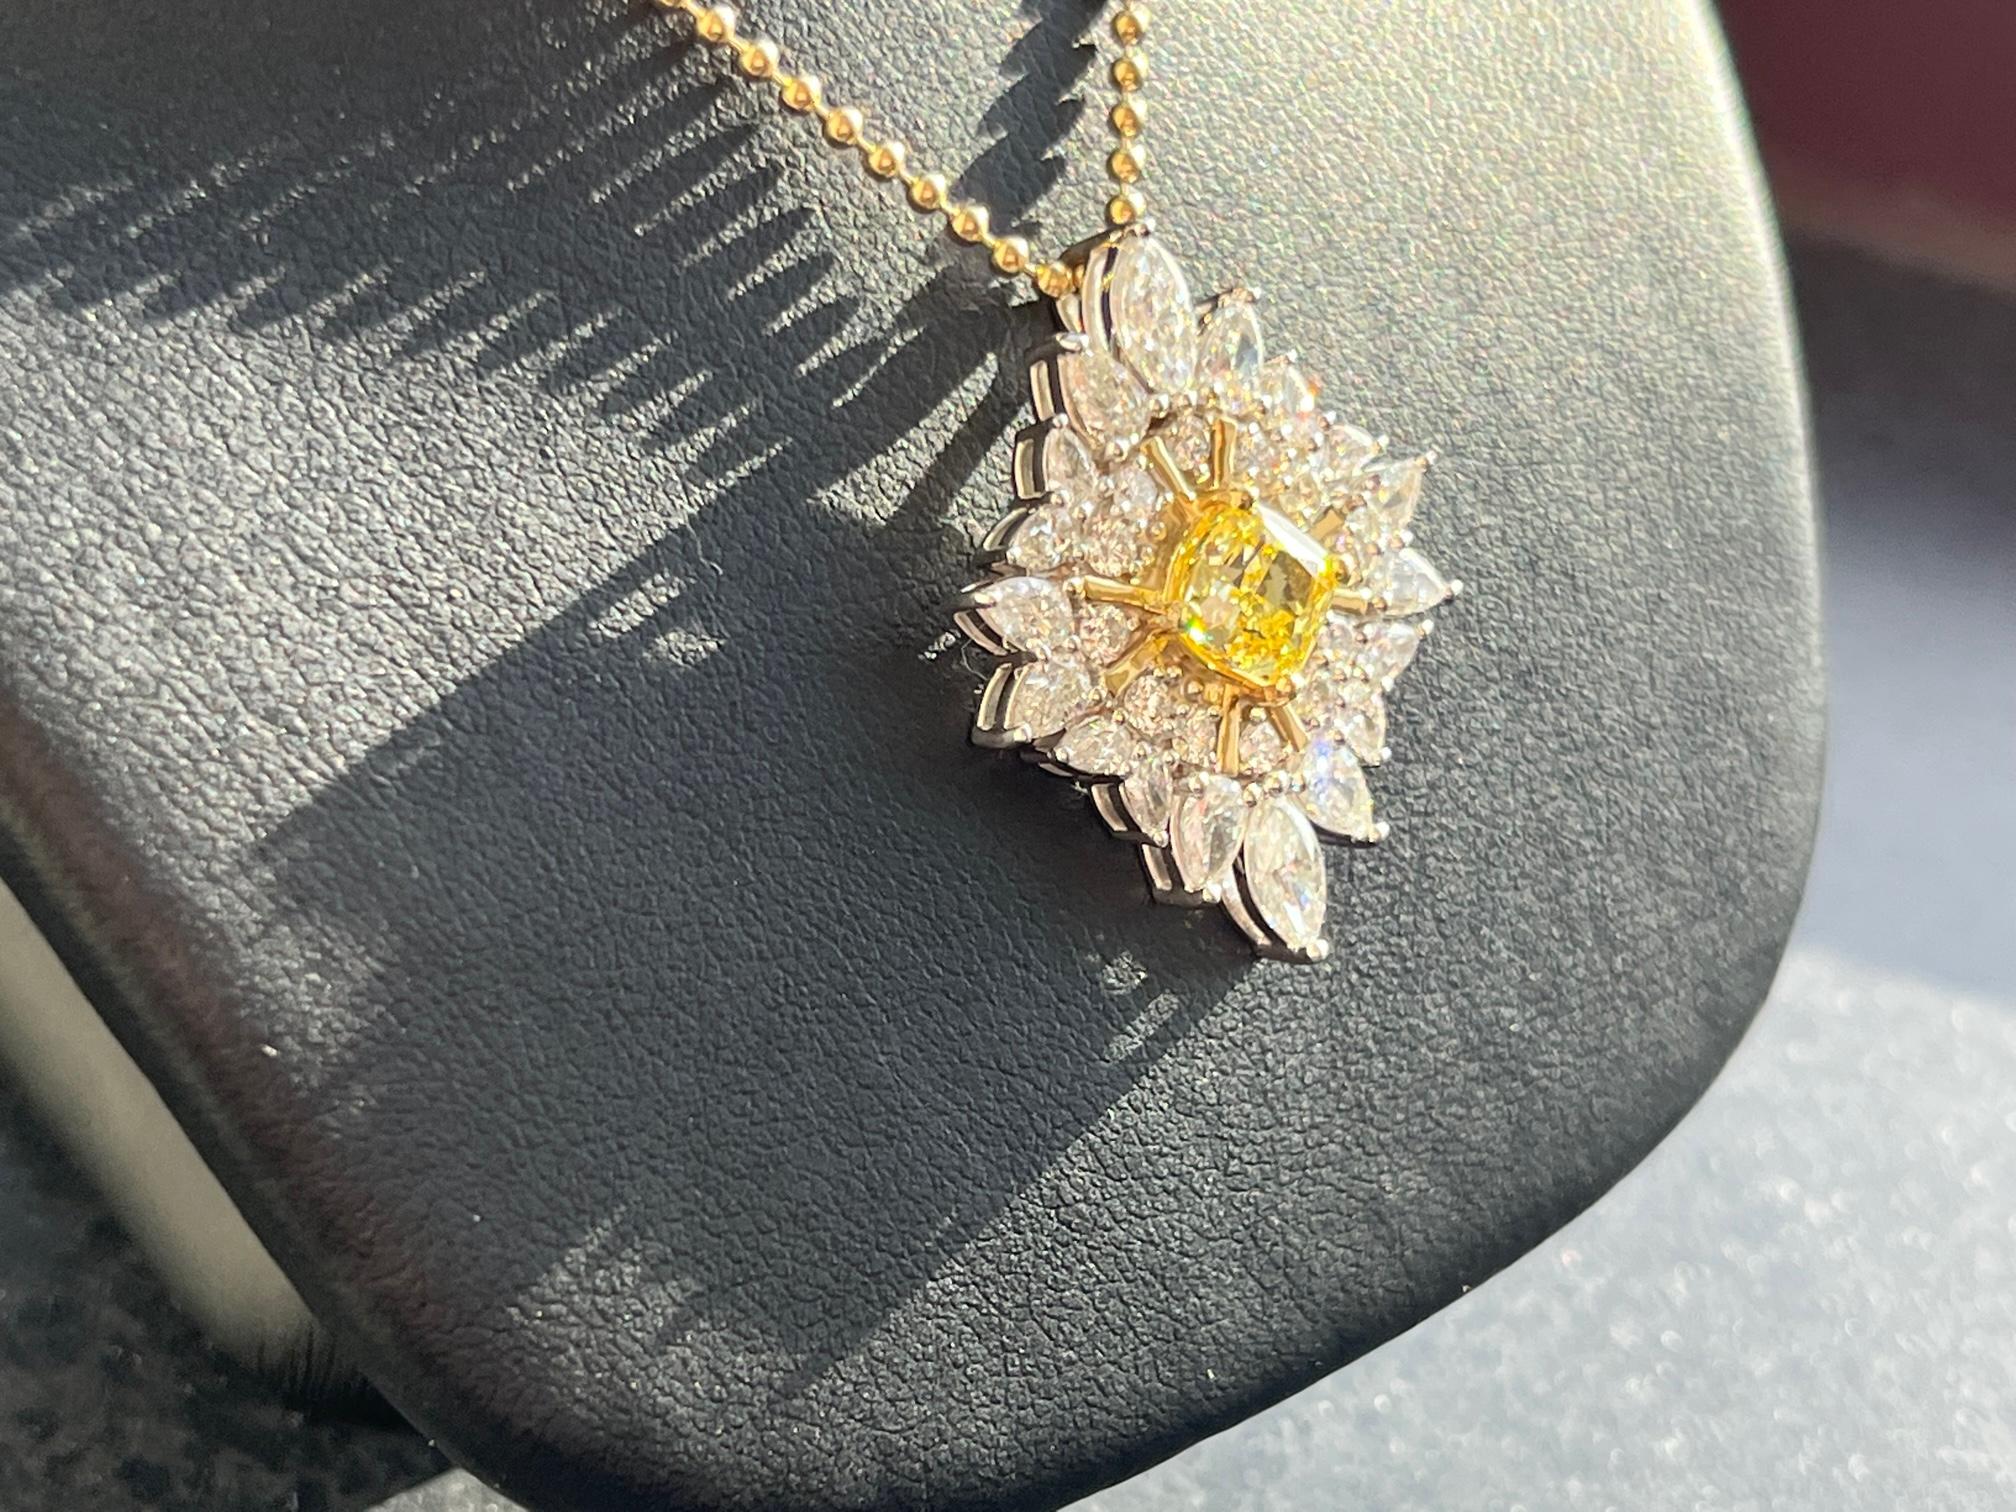 Beautiful Star-shaped pendant necklace.  1.31 Fancy intense yellow (GIA Certificate #2367295053), VS1 quality with 2.19 white diamonds set in 18K Yellow and white gold.  18in chain (14K yellow gold) 